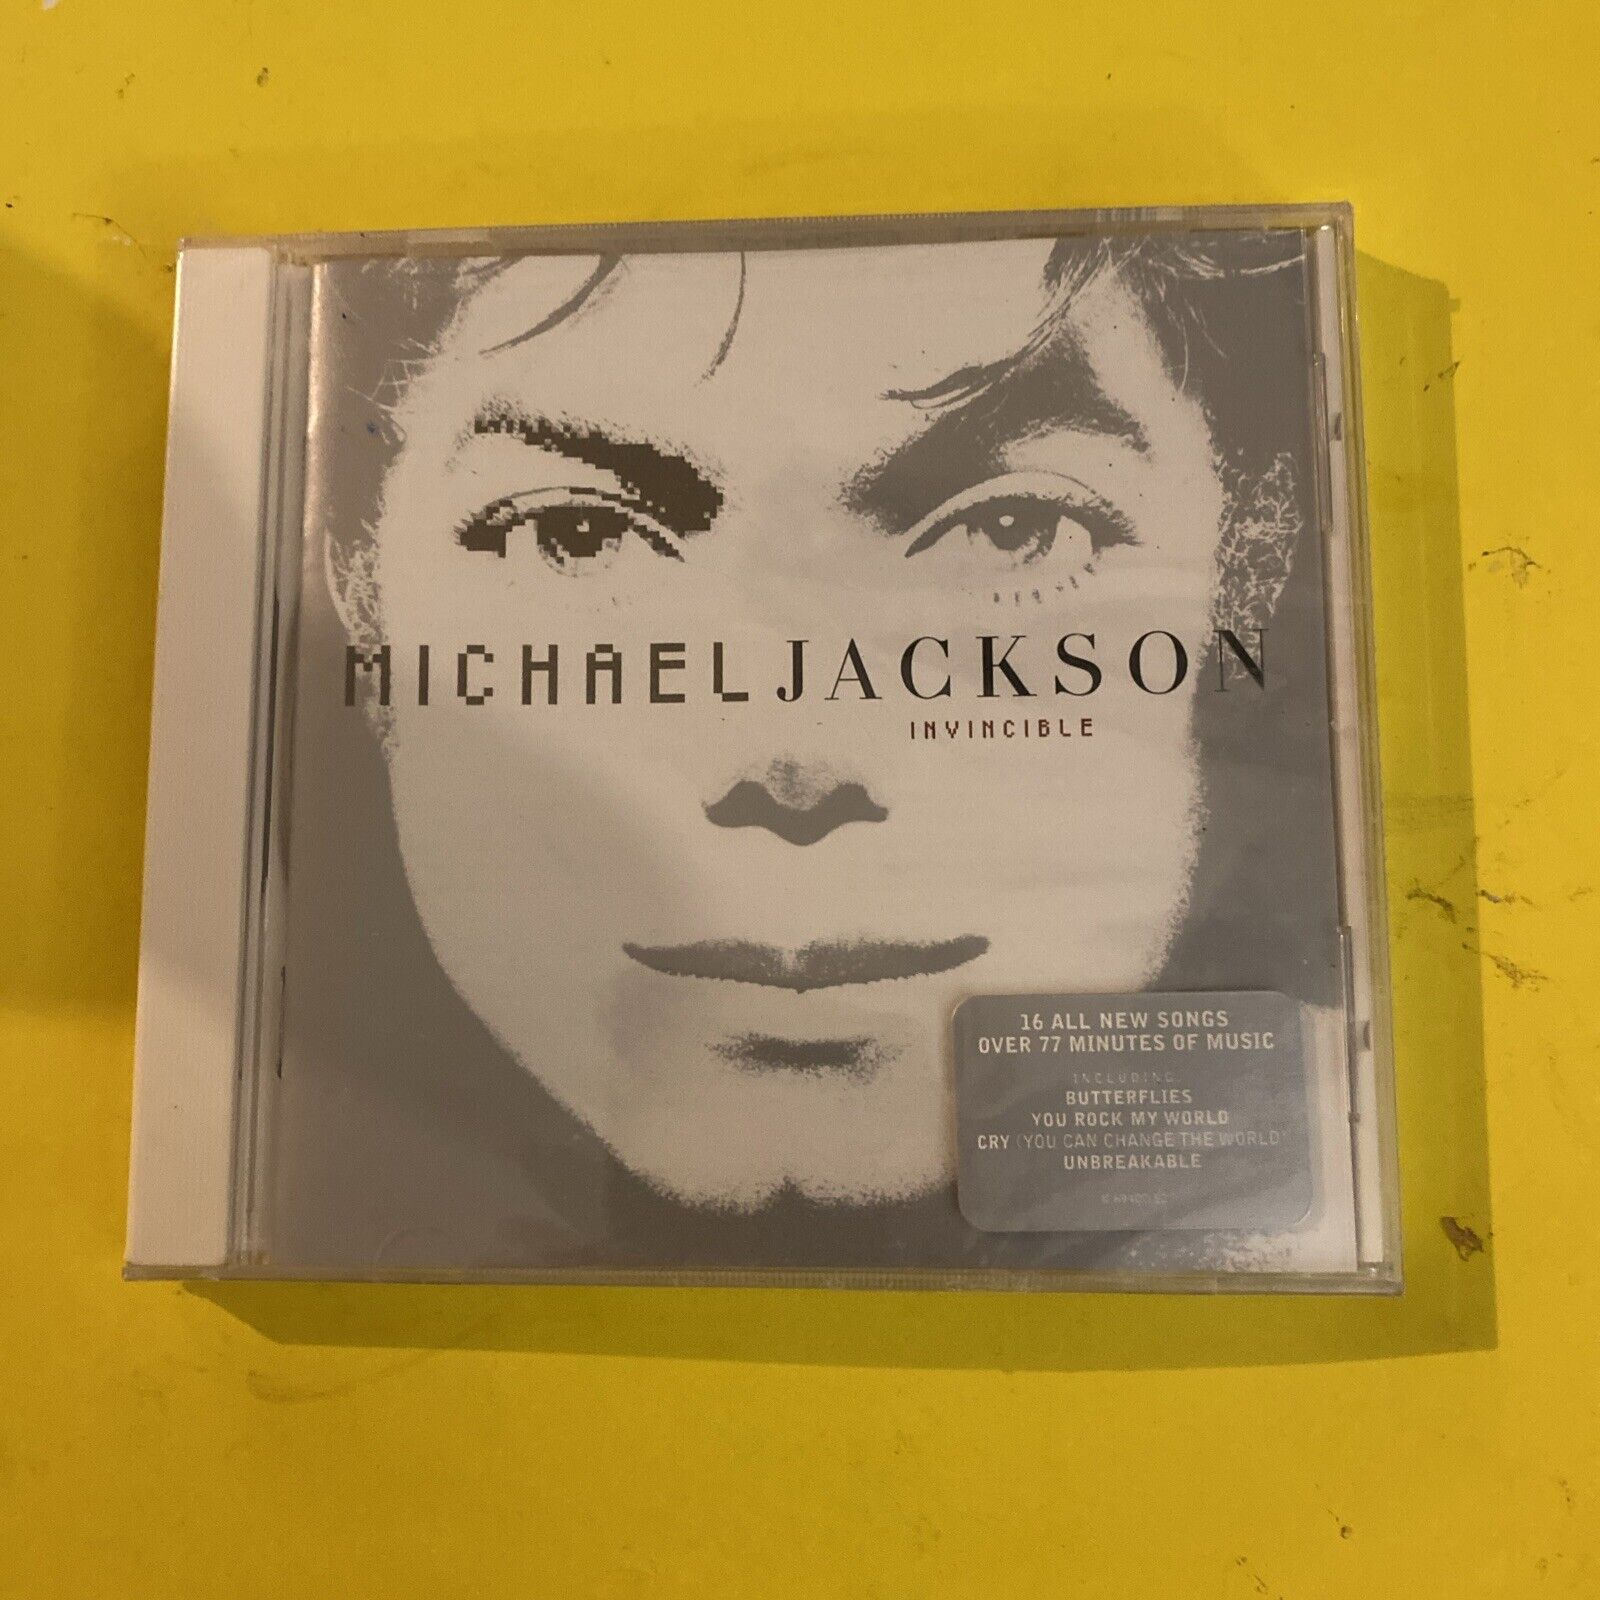 MICHAEL JACKSON INVINCIBLE (CD 2001) EPIC - BRAND NEW SEALED FAST 